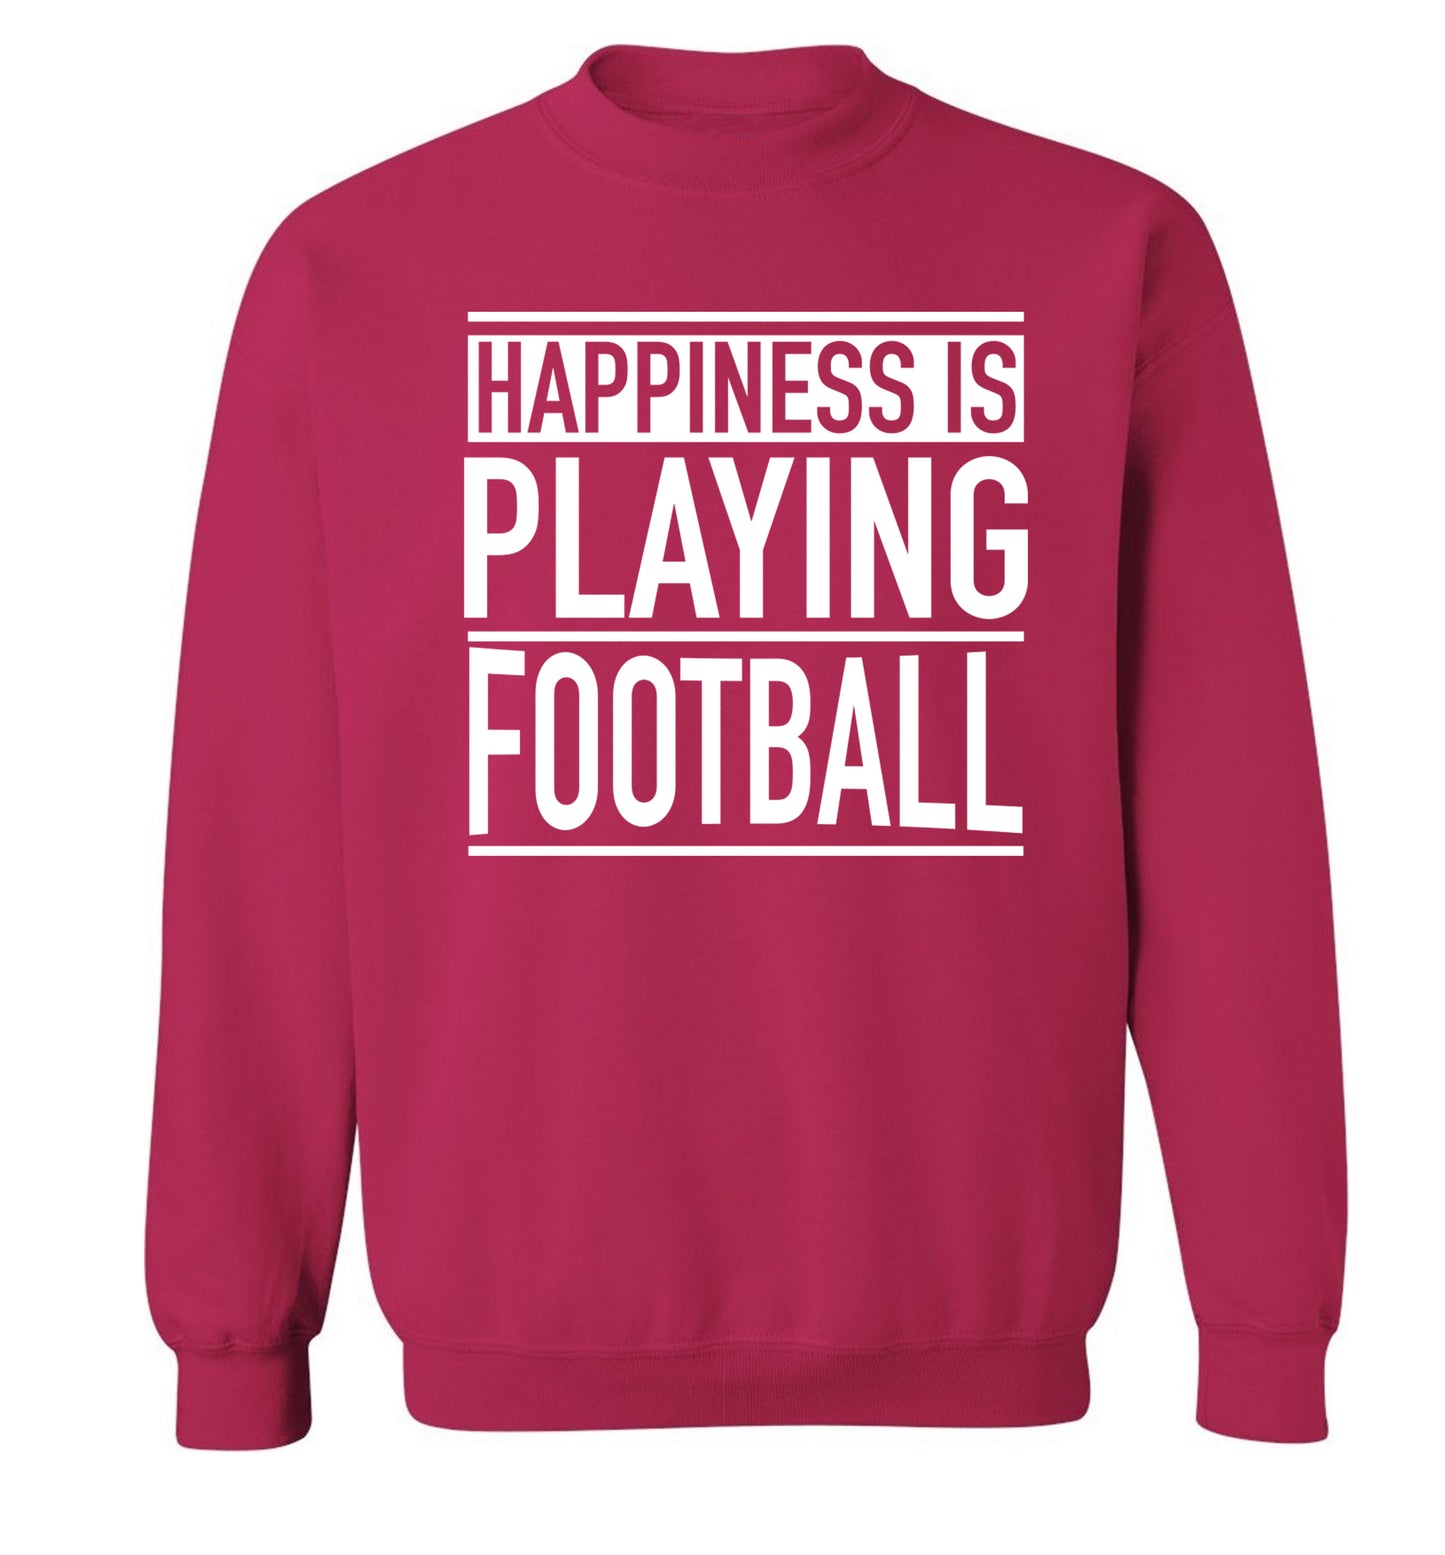 Happiness is playing football Adult's unisexpink Sweater 2XL